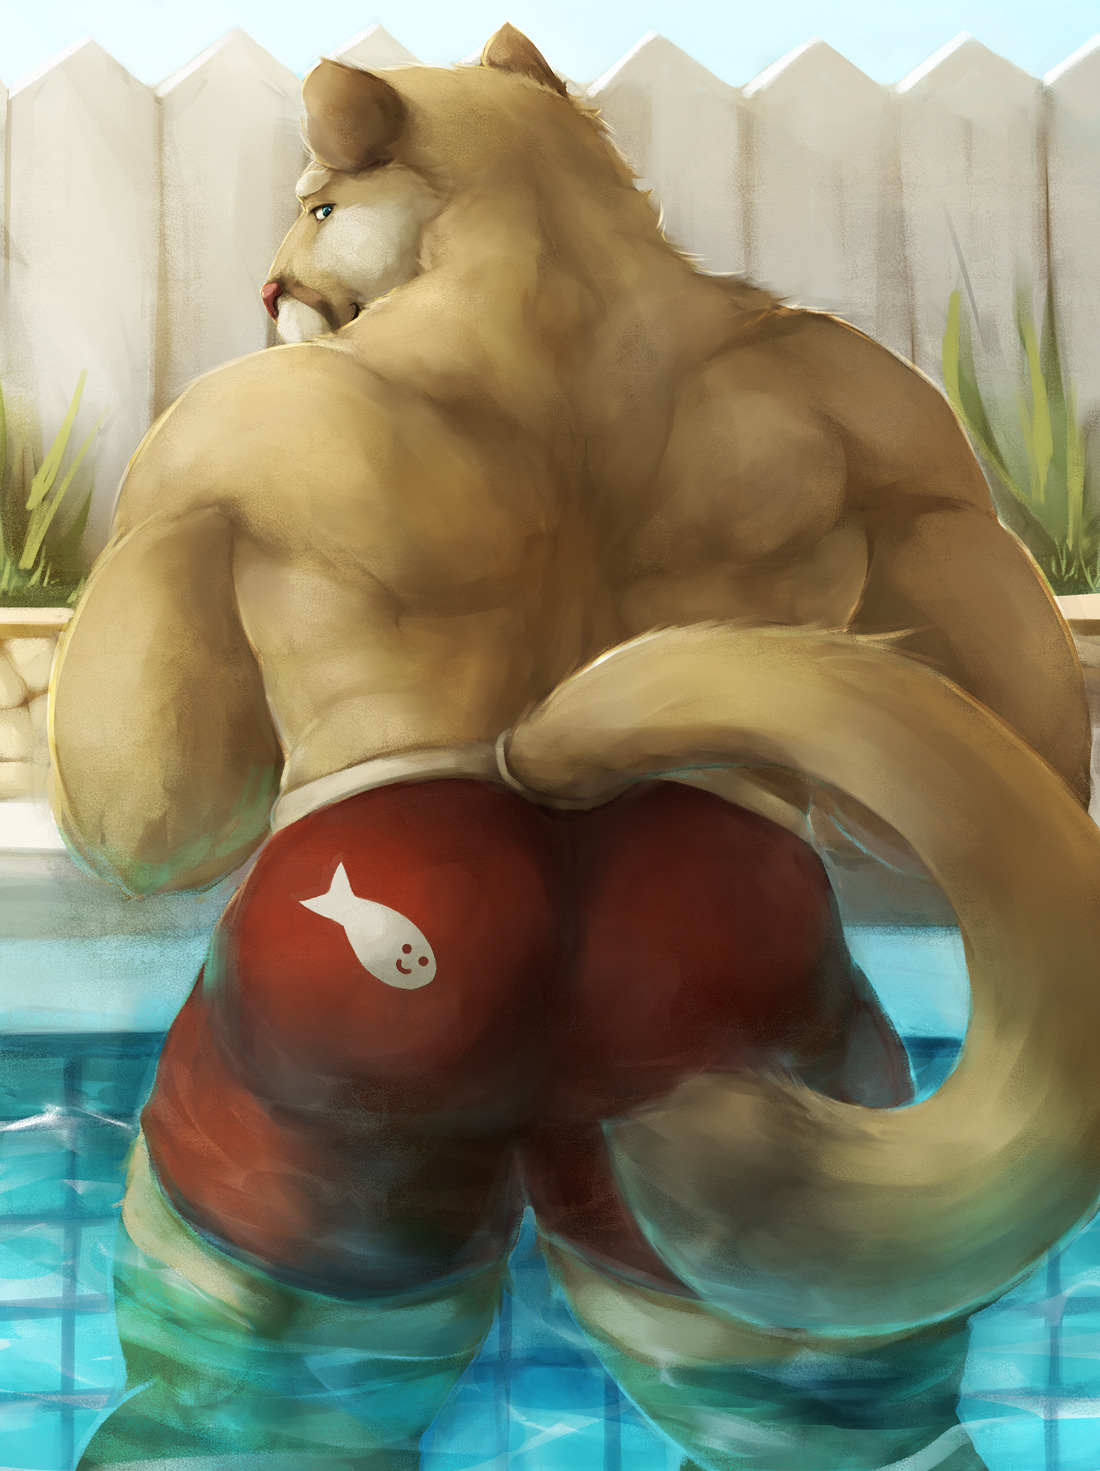 ralphthefeline:There have been a significant lack of back and booty lately, so drew